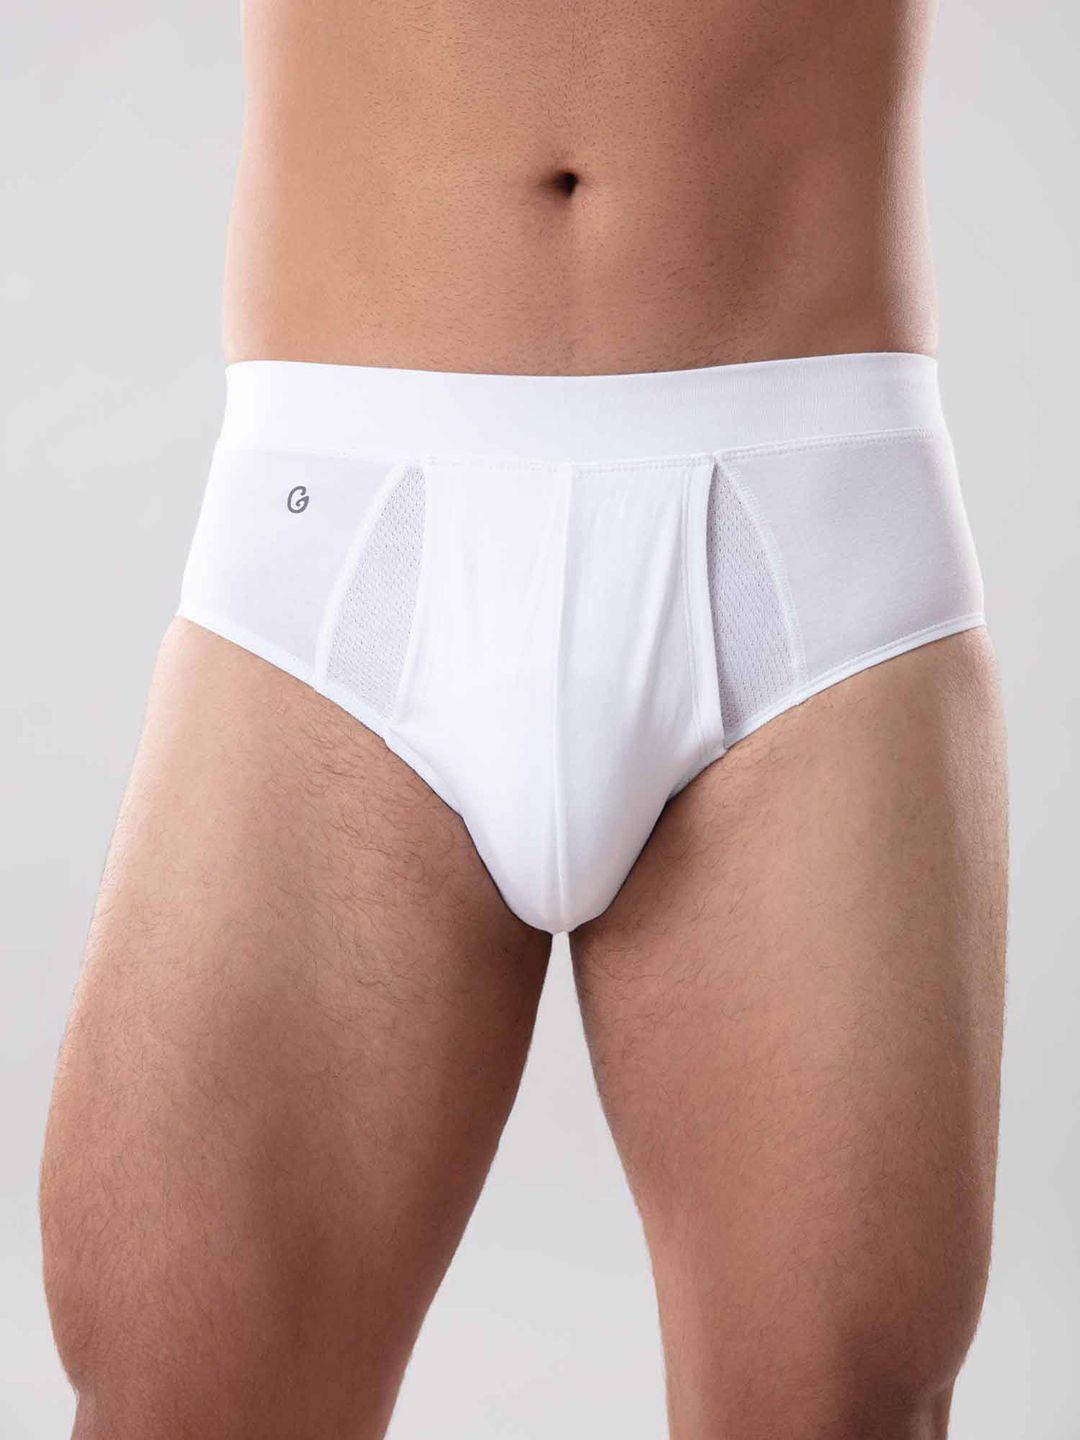 gloot men white brief with anti odor & cool mesh zones